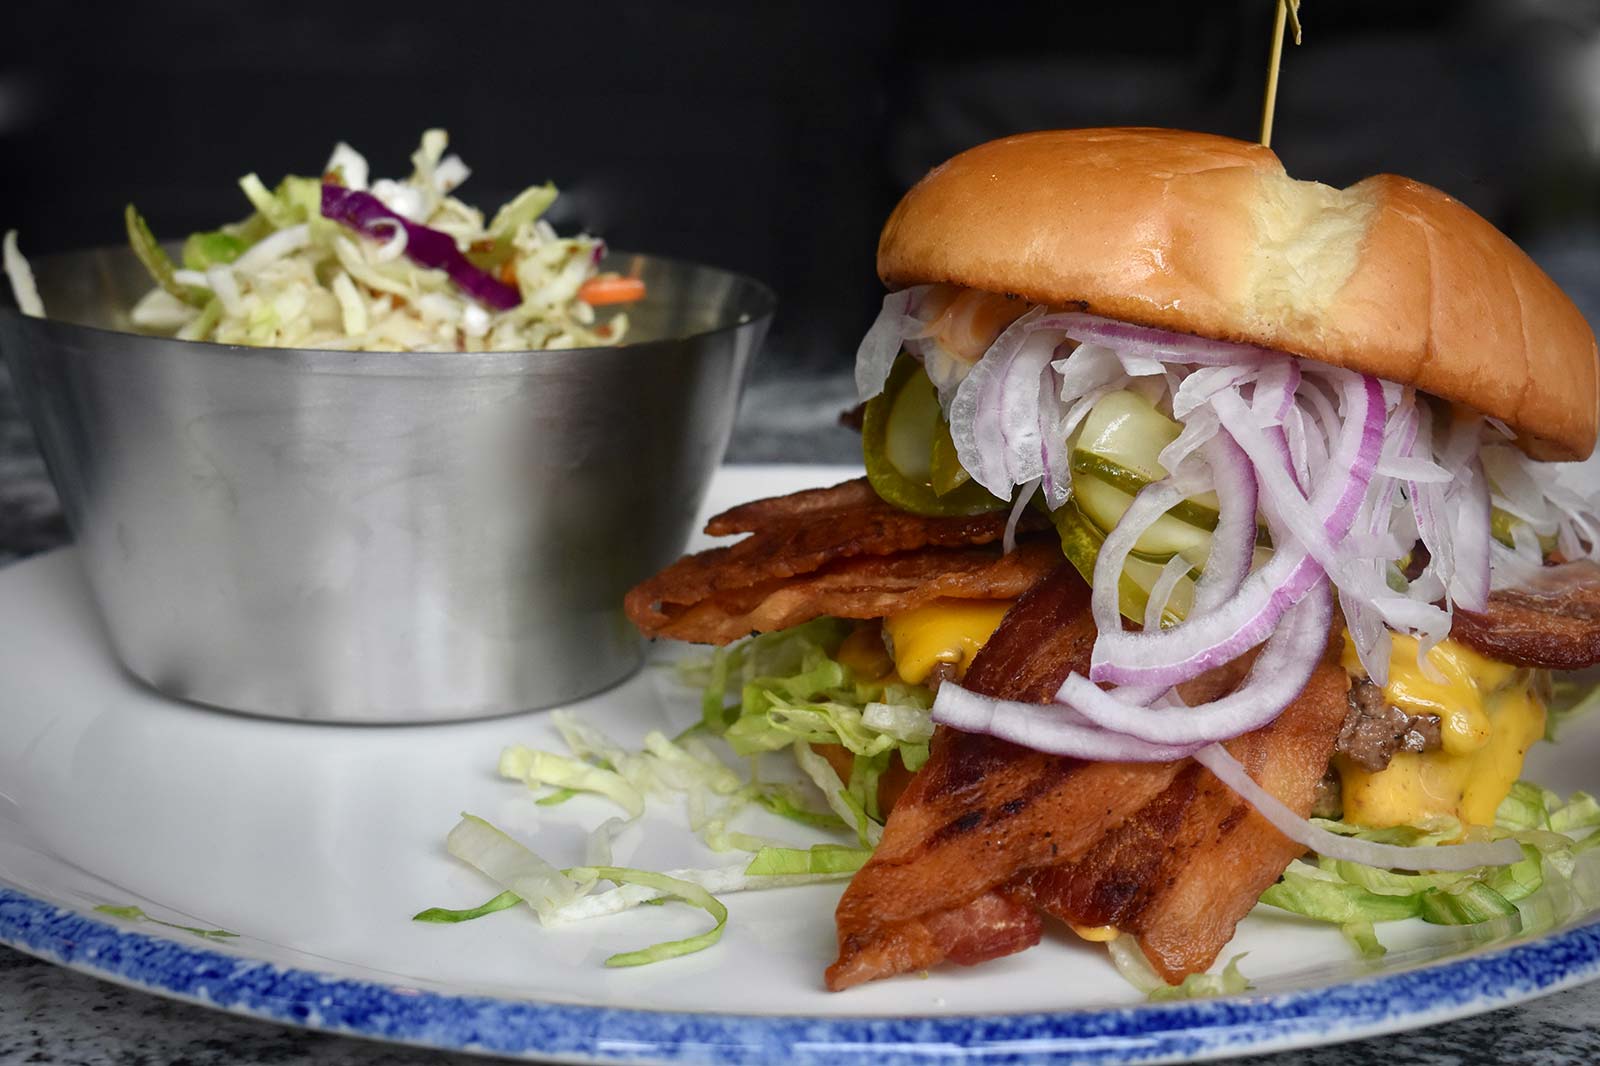 Tavern at the Point - Bacon Cheeseburger and Coleslaw